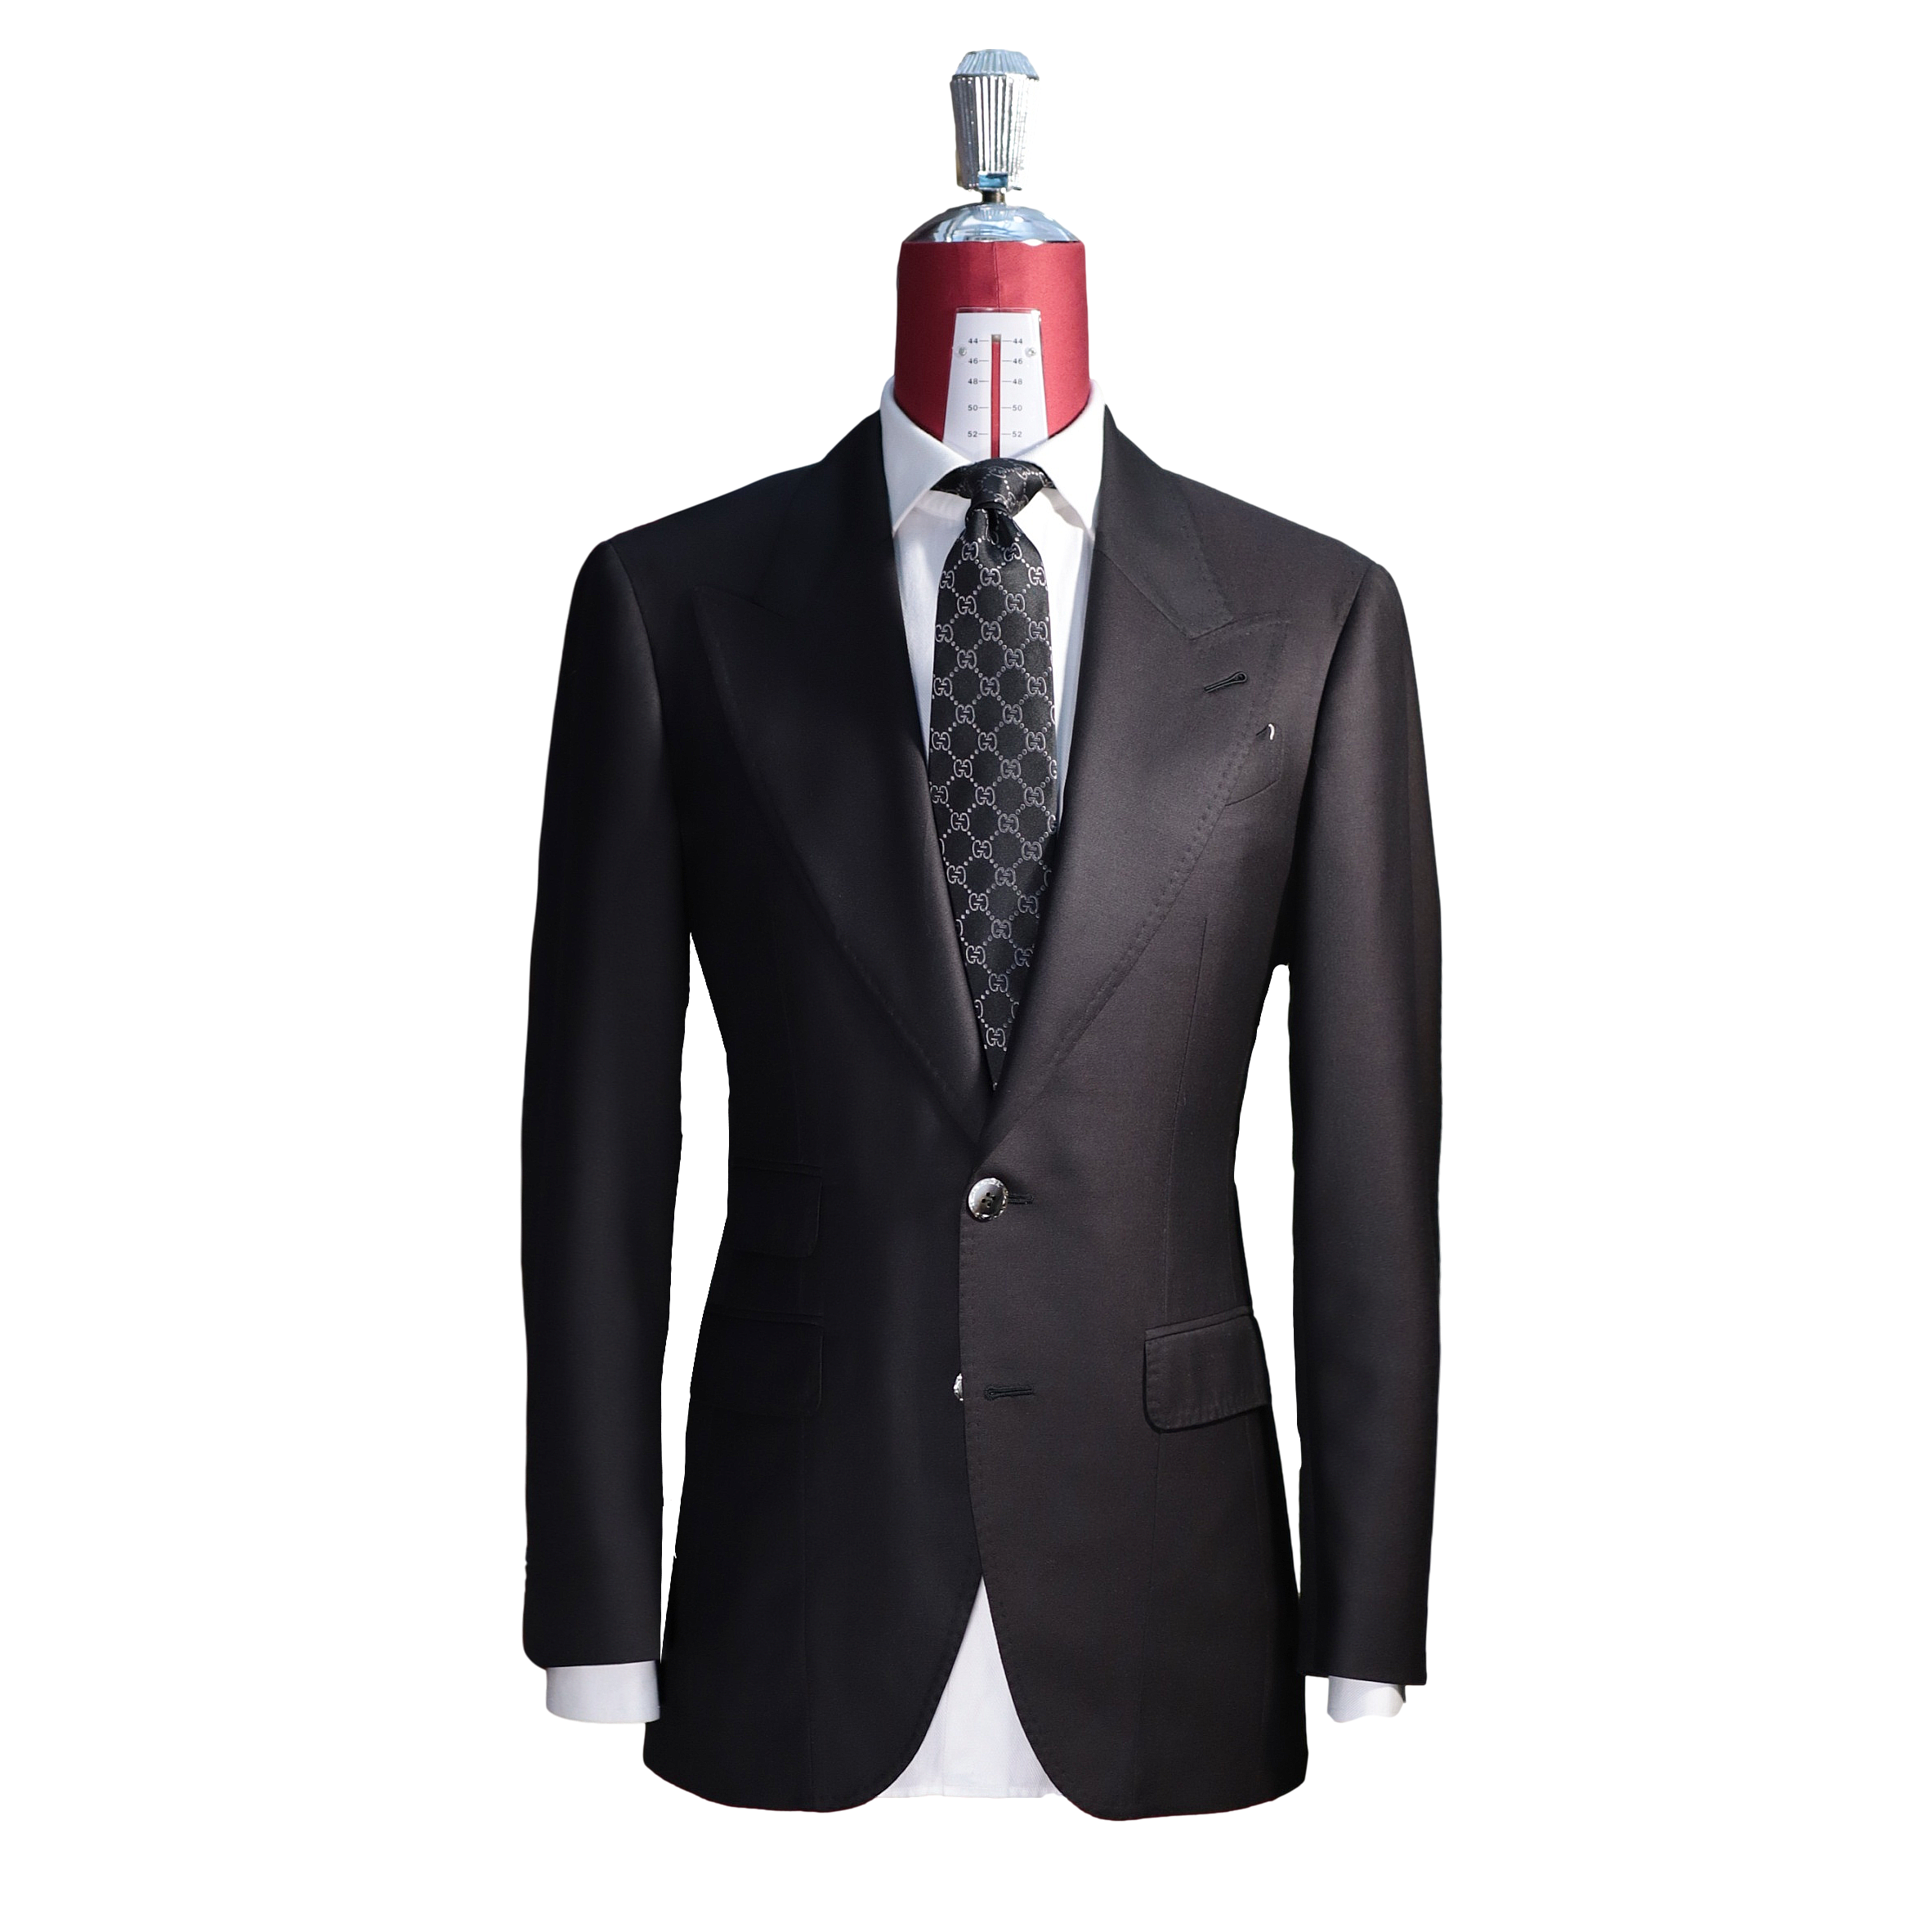 Vincezo Black Suit | Standeven Masterpiece Super 150s Brown Black Bespoke To Measure made to measure Made Suits Singapore Tailor.png